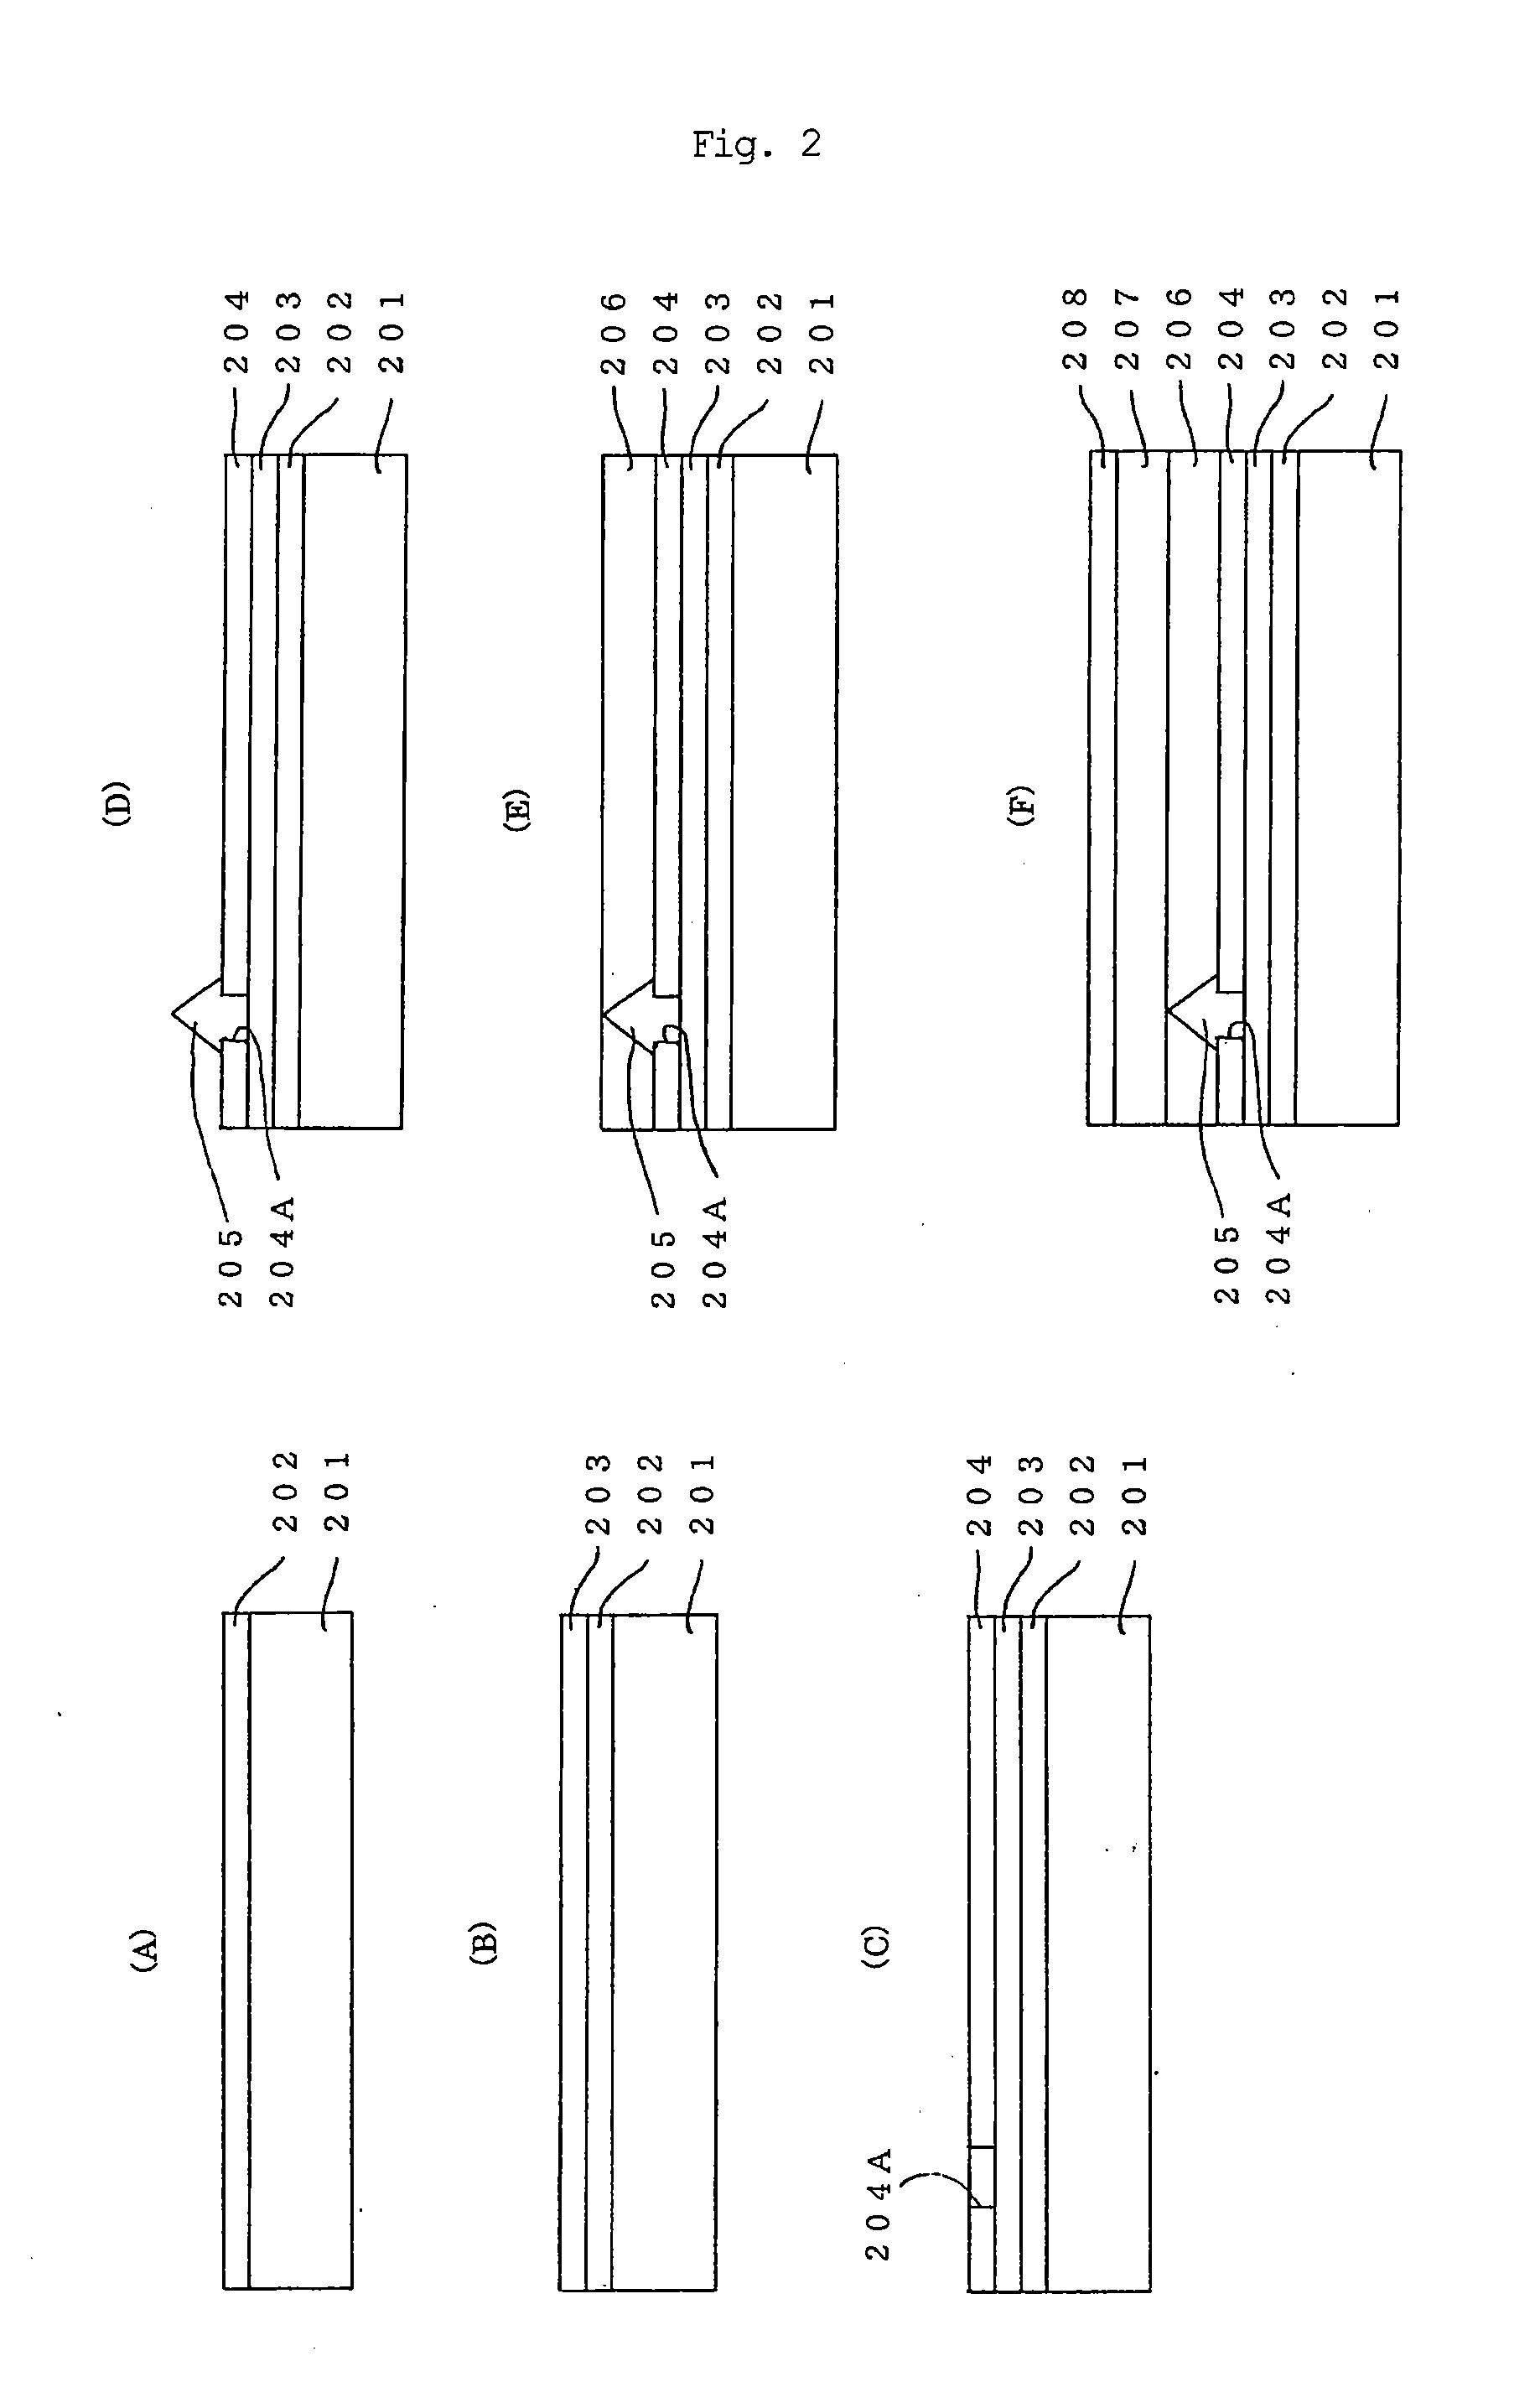 Gallium nitride epitaxial crystal, method for production thereof, and field effect transistor